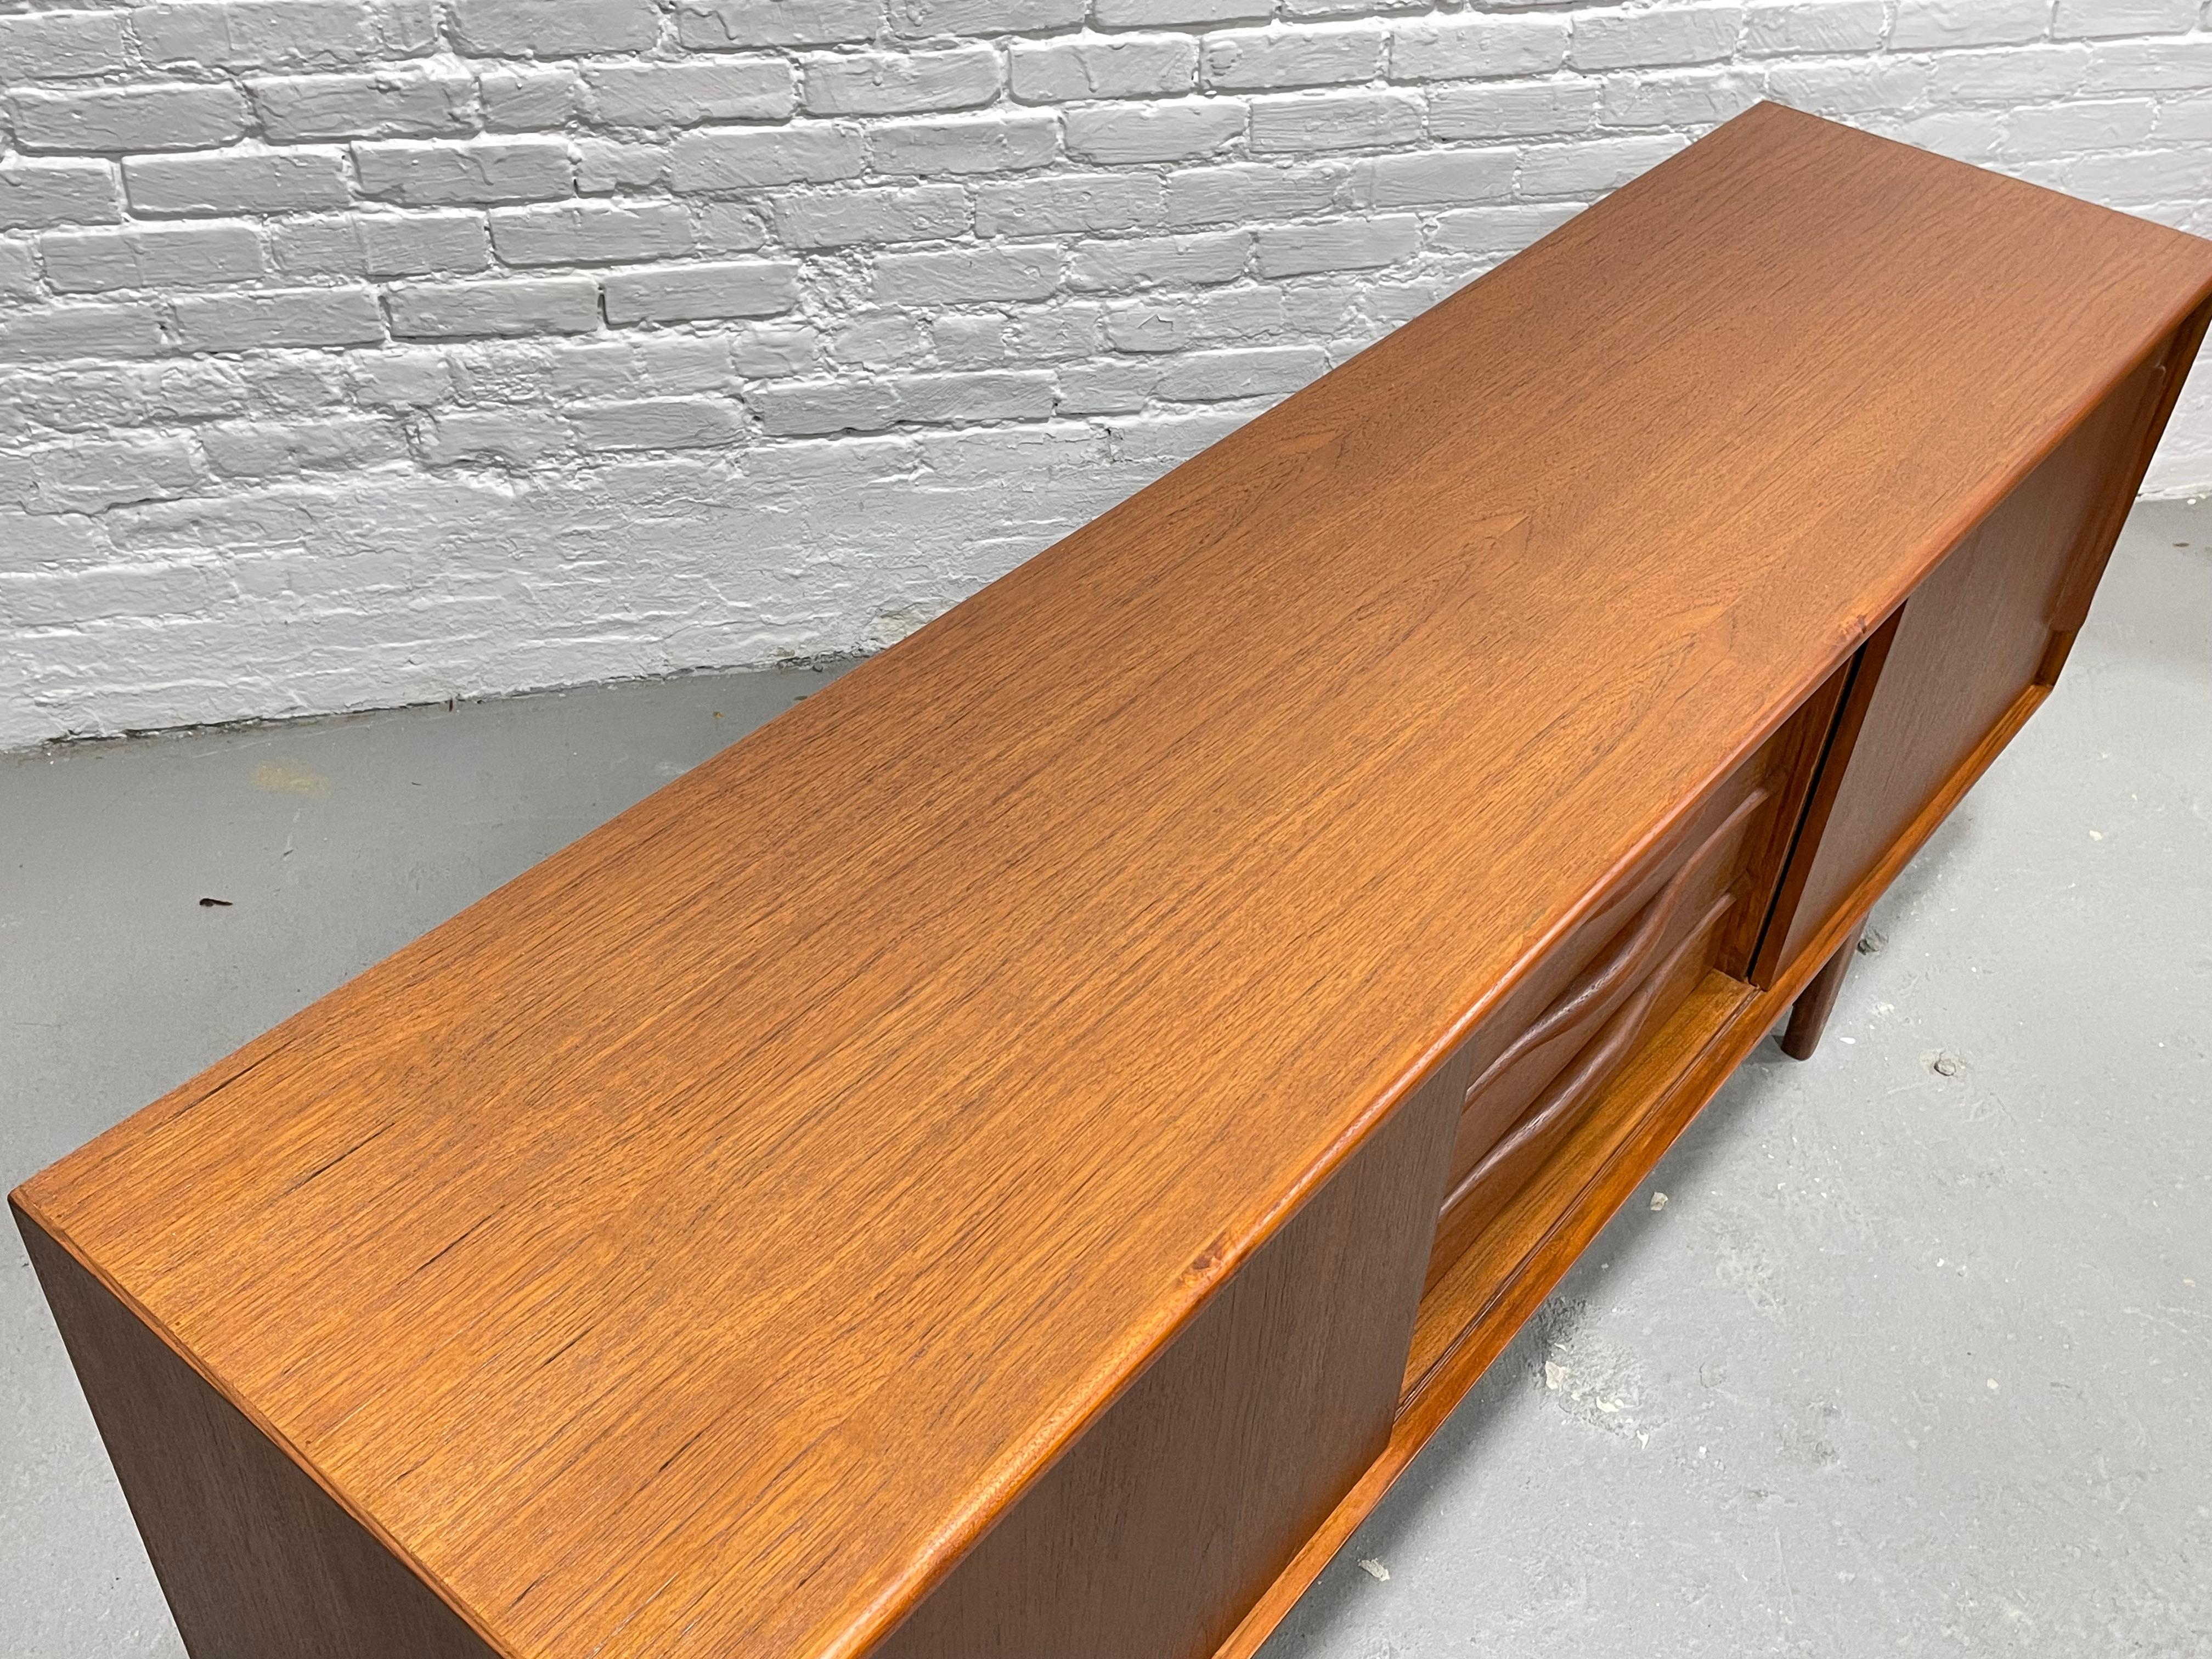 Long Sculpted Mid-Century Modern Styled Danish Teak Credenza For Sale 9